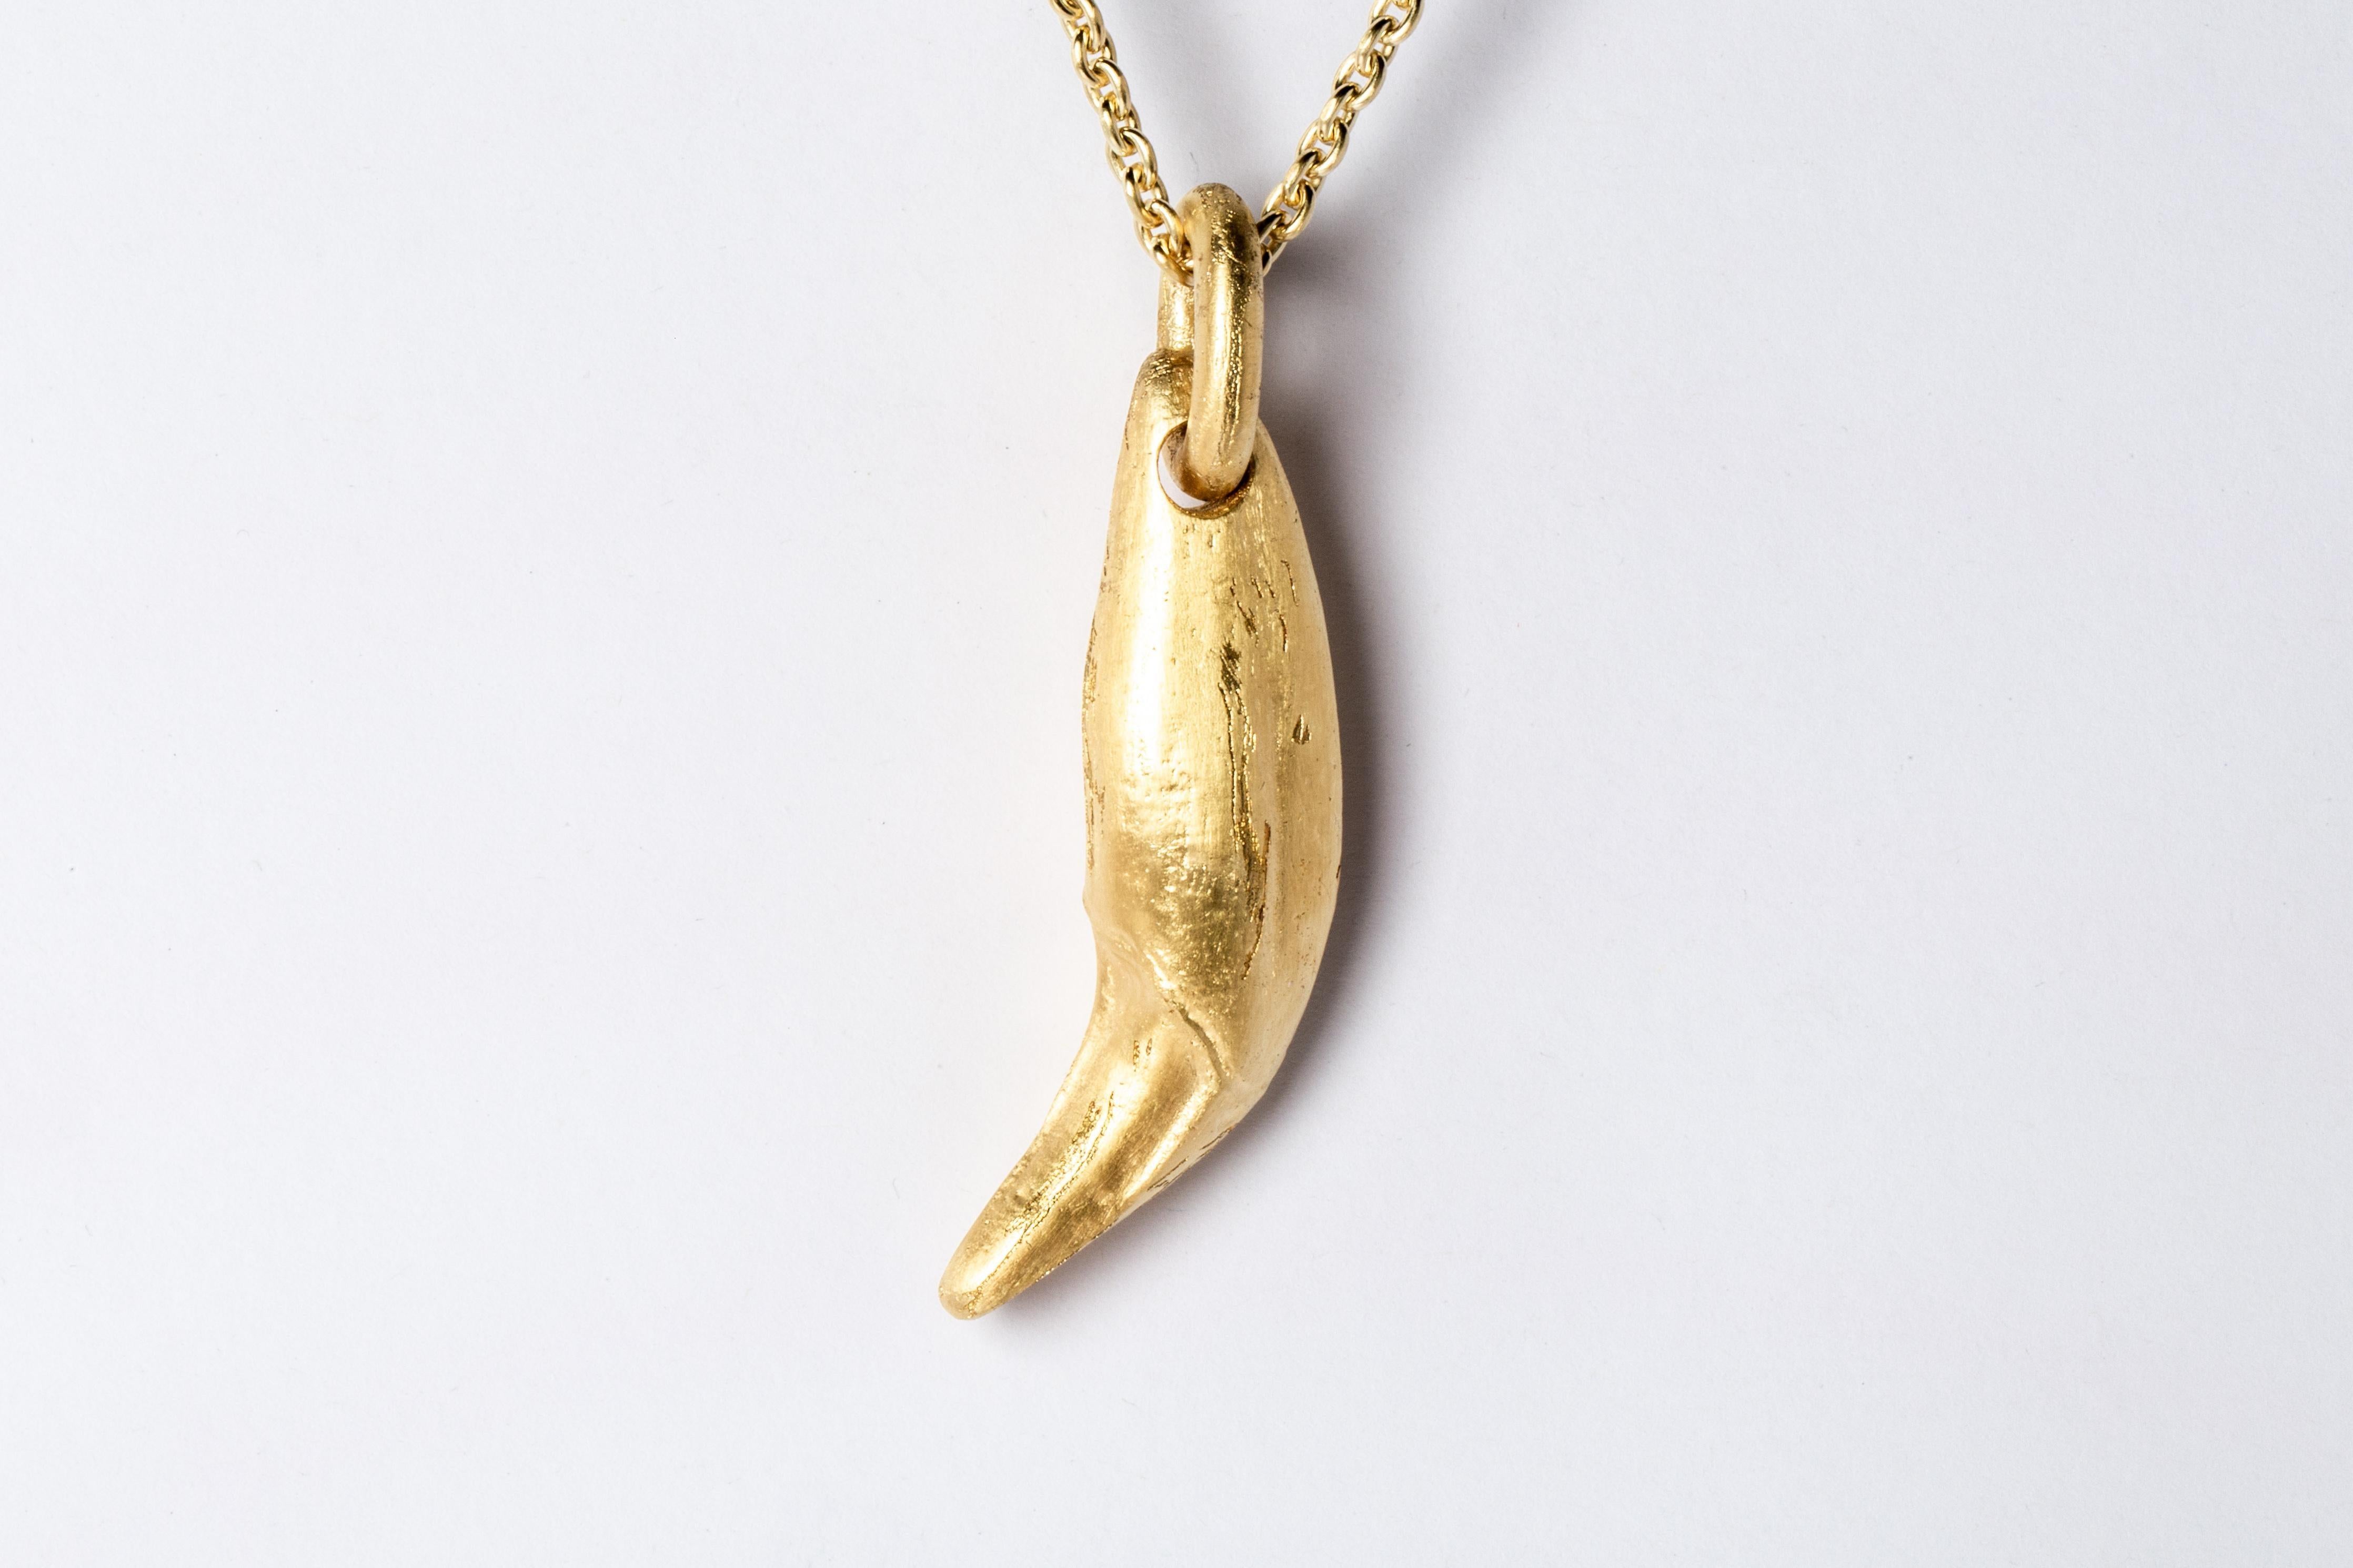 Bear Tooth Necklace Ghost (Small, AG+AGA) In New Condition For Sale In Hong Kong, Hong Kong Island